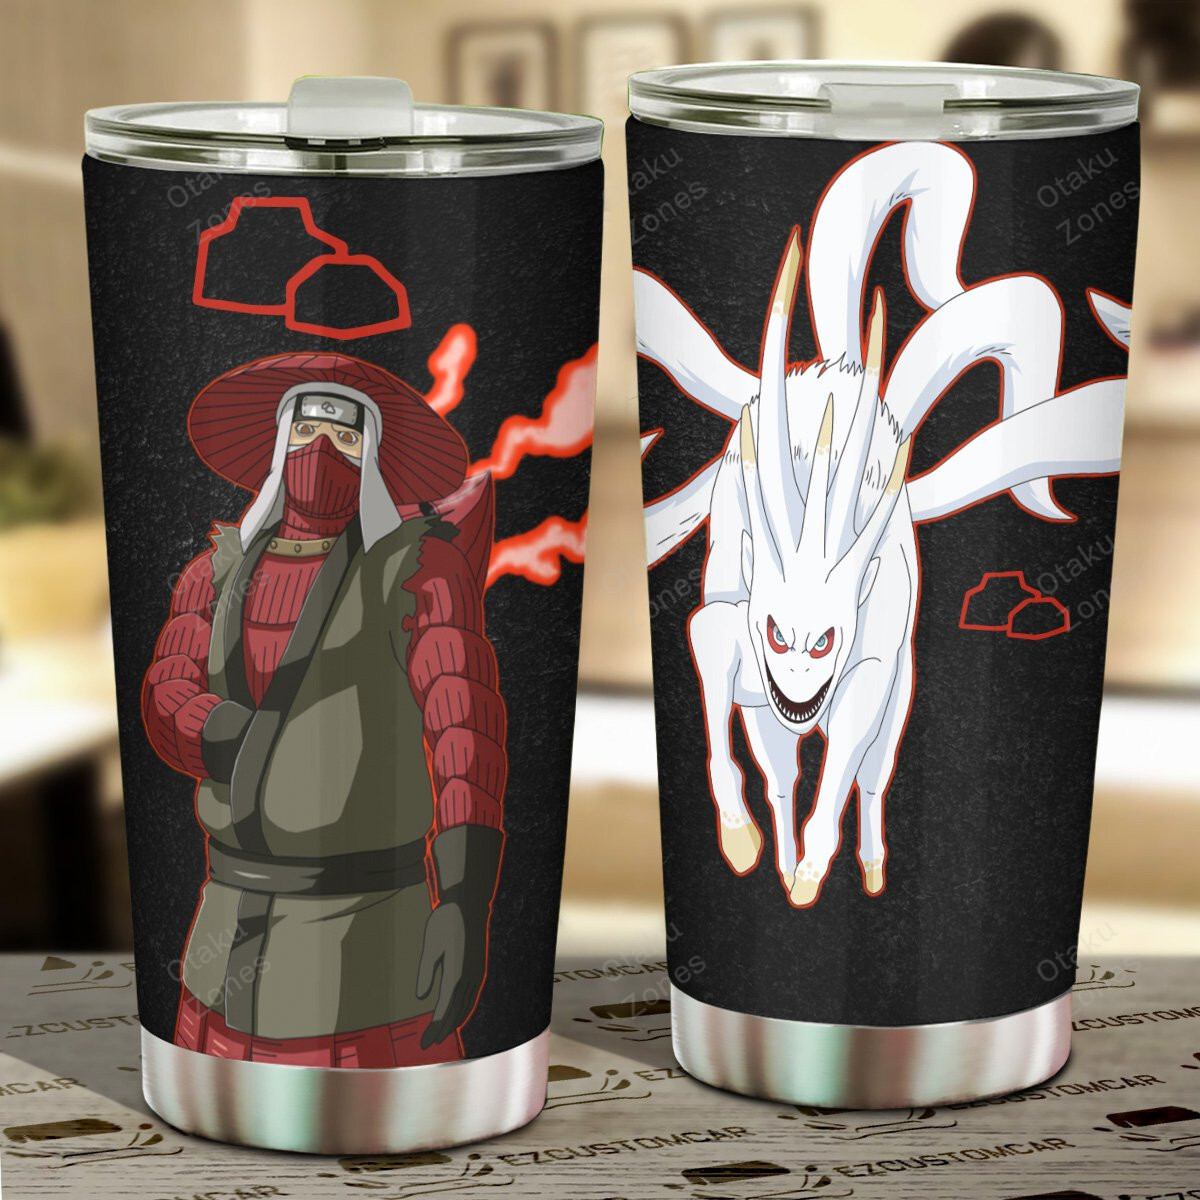 Go ahead and order your new tumbler now! 22